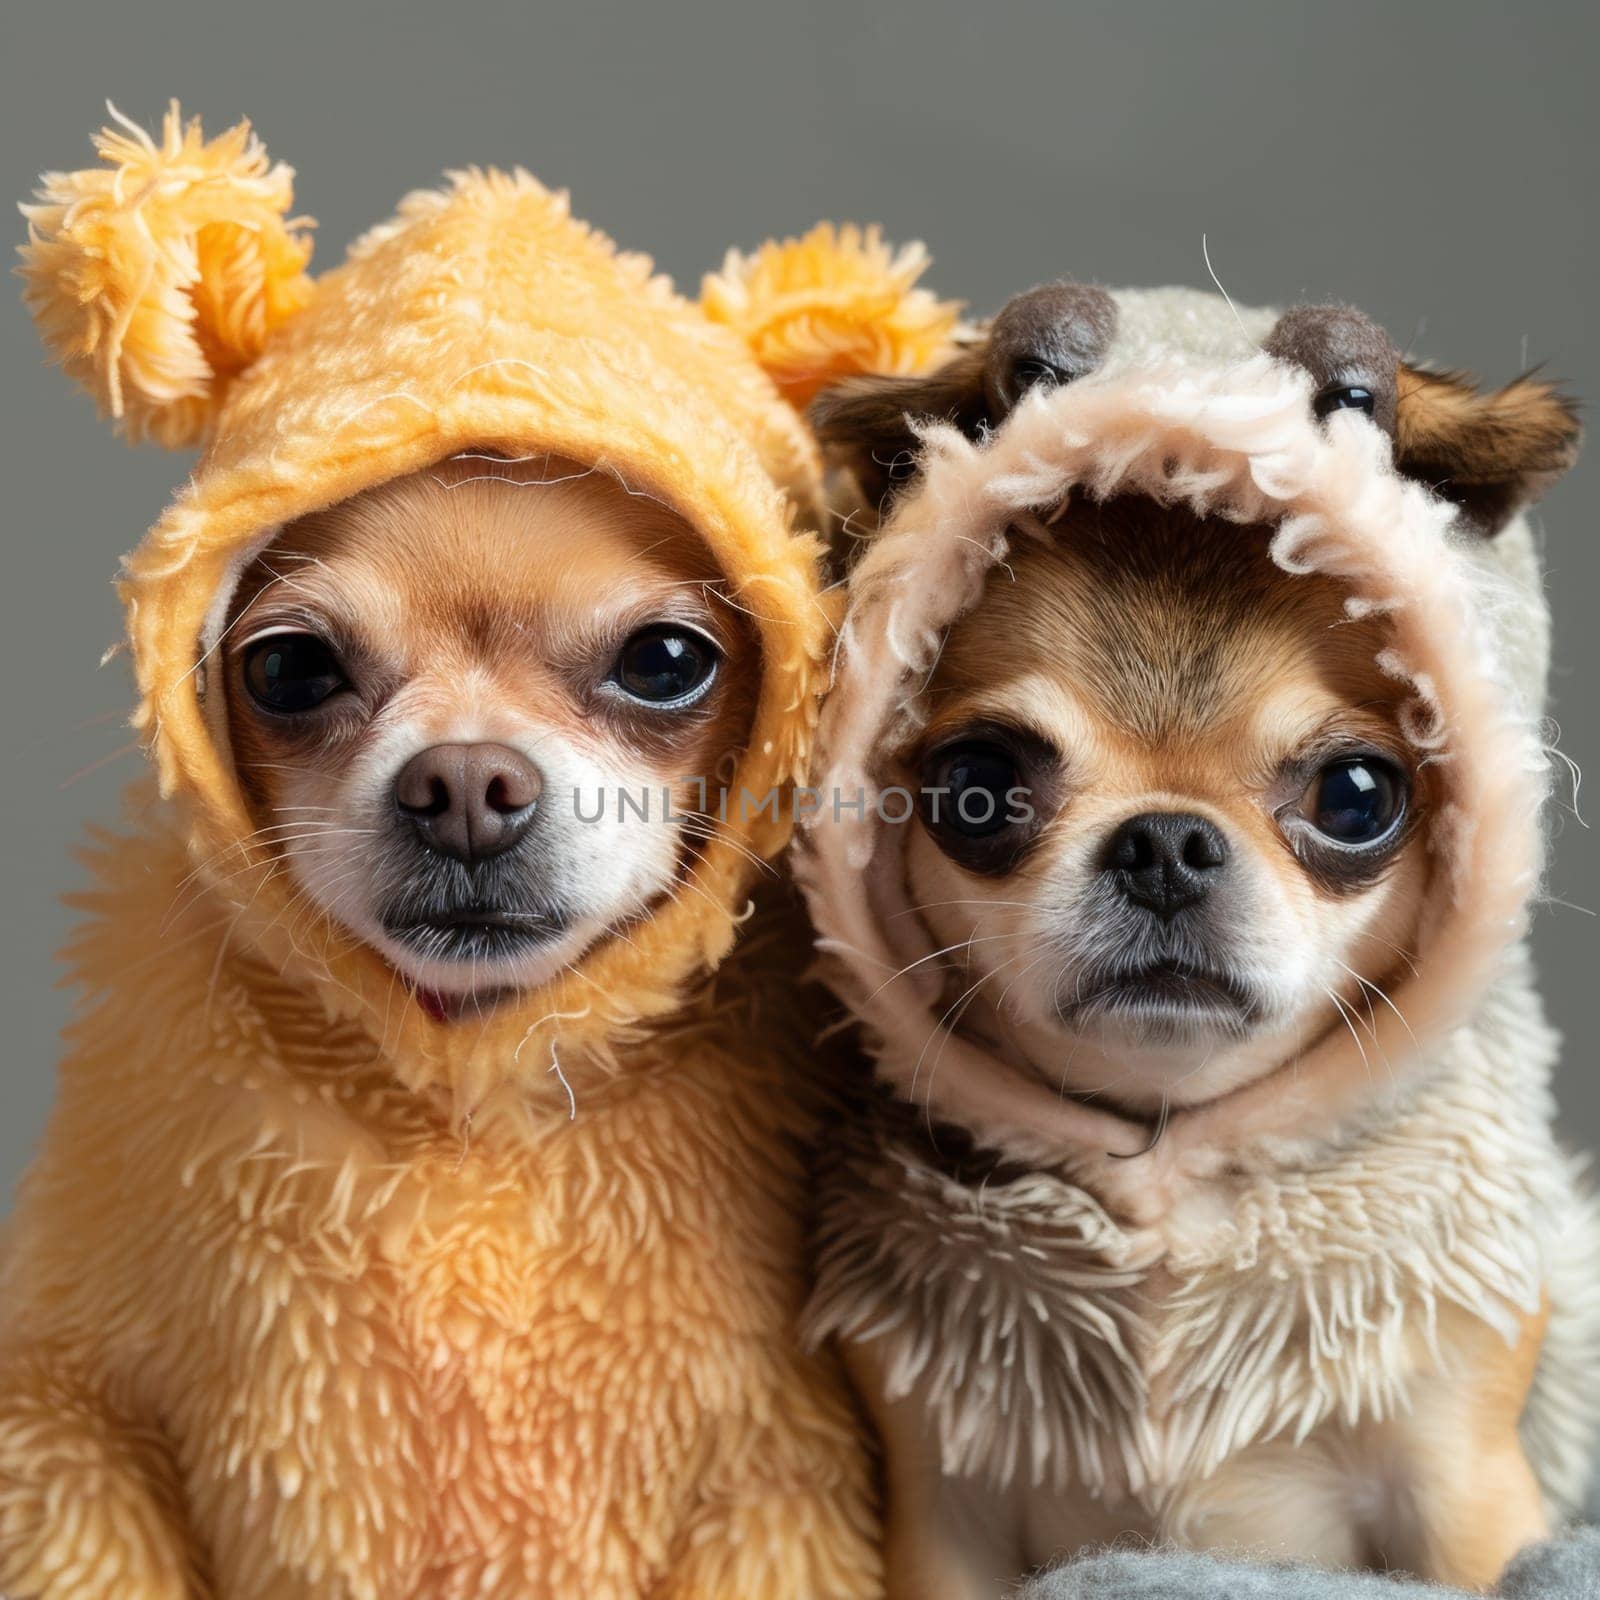 Funny headshot of two chihuahuas dressed as guinea pig by papatonic